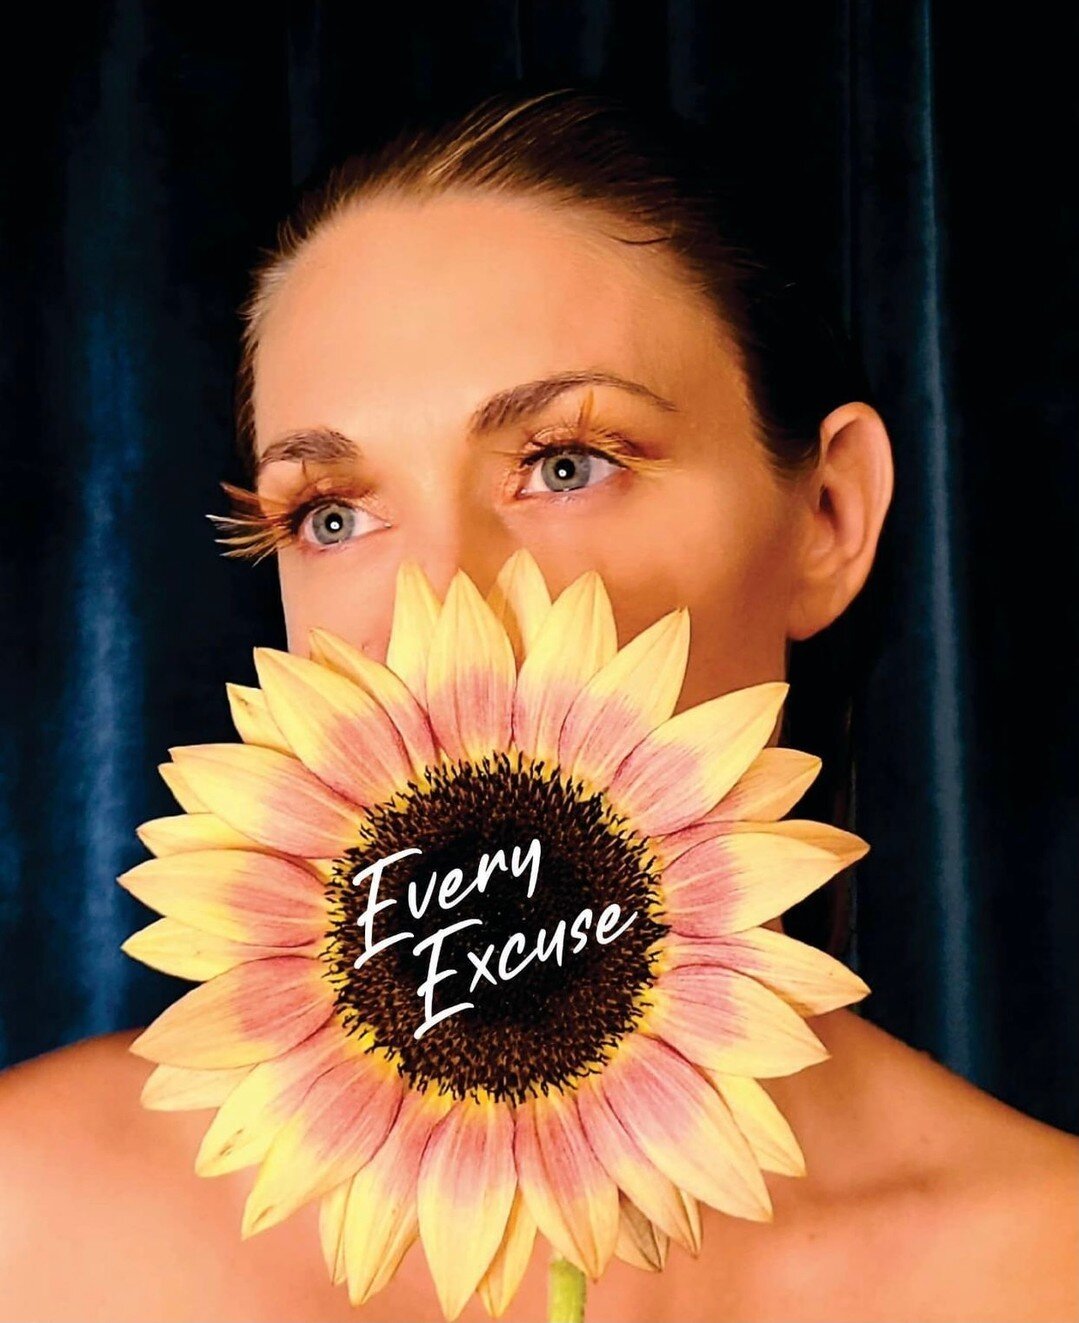 Three years after taking a leap of faith to pursue her passion for music, @jesabelmusic is celebrating the release of her latest single, &quot;Every Excuse.&quot;🌻 Make sure you head to the link in her bio to give it a listen! 💛 #newrelease #newsin